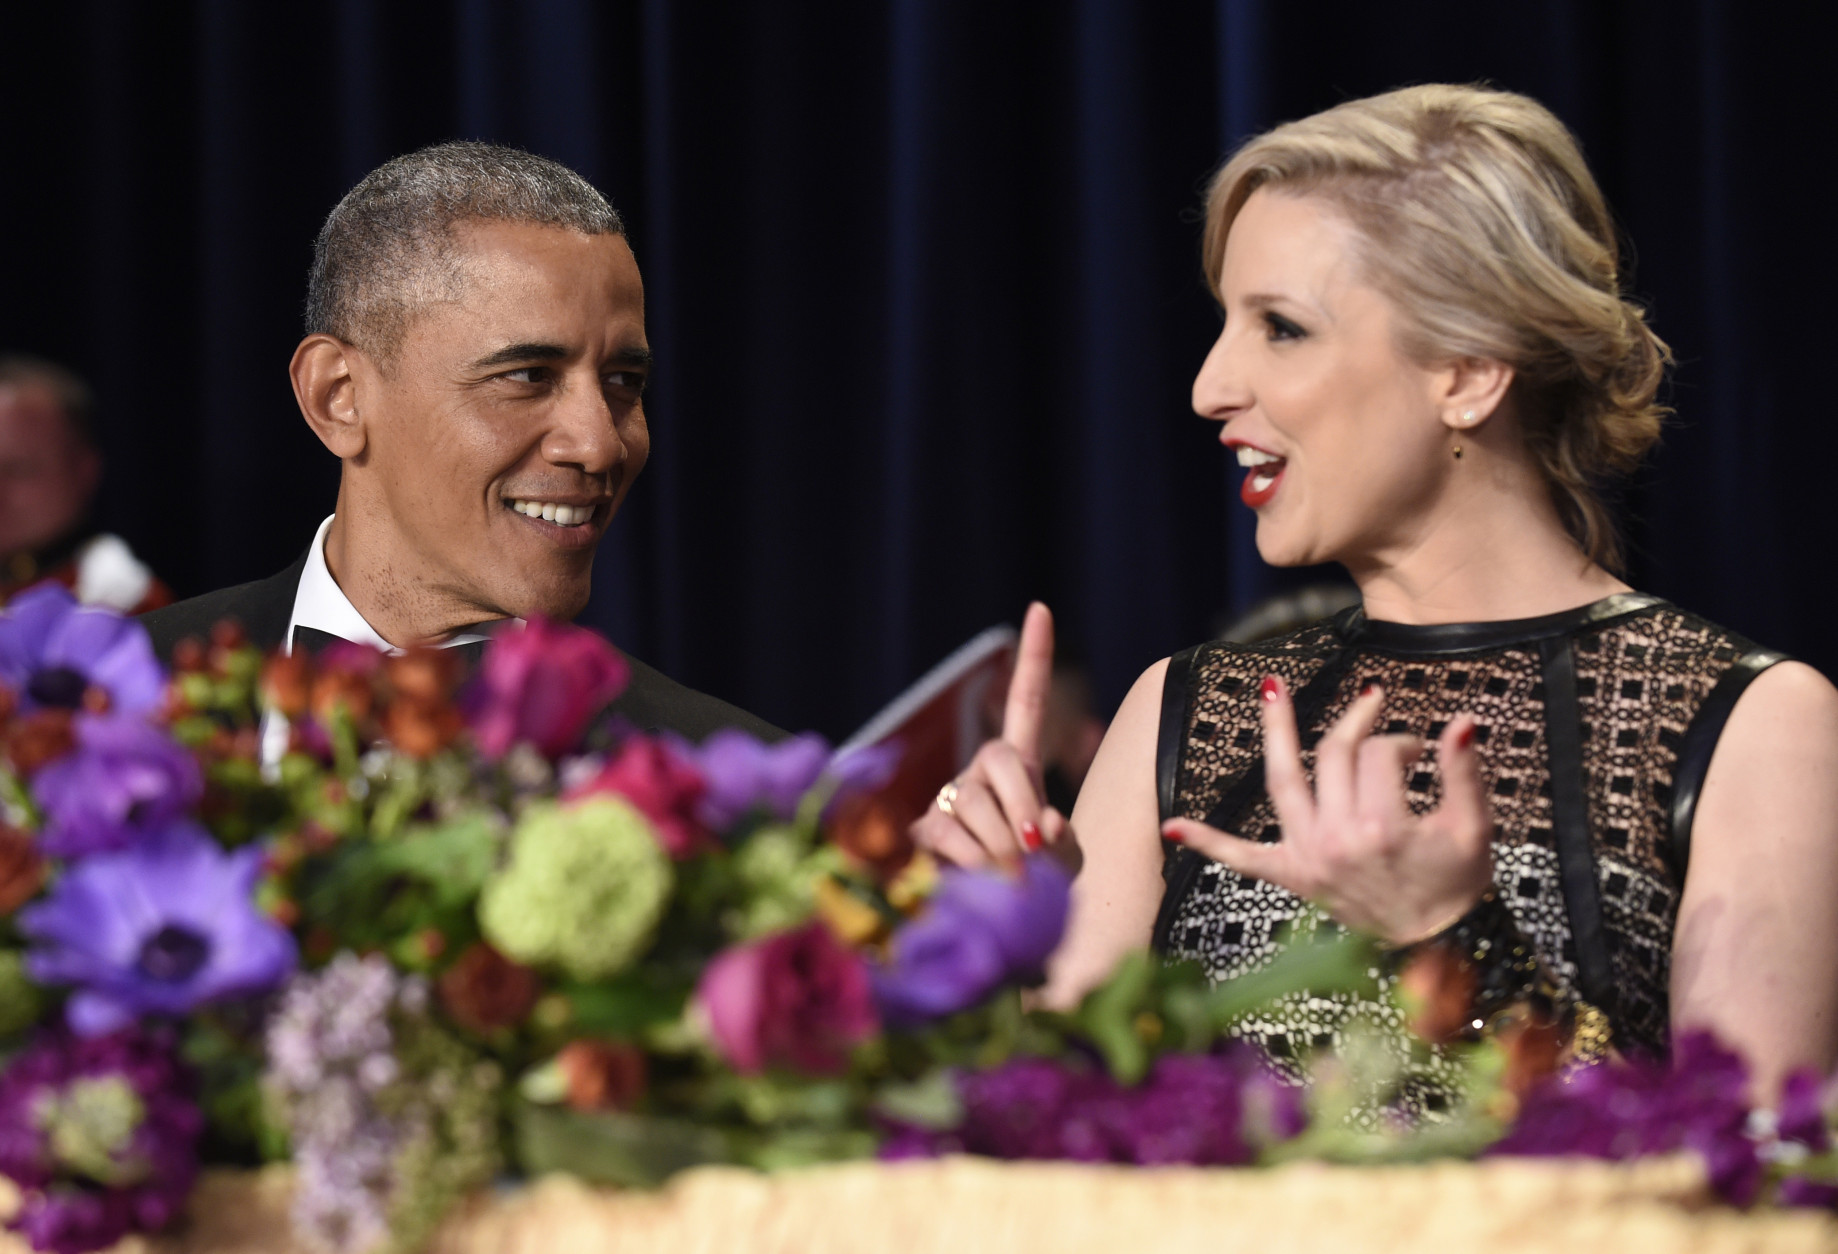 President Barack Obama, left, talks with Carol Lee, right, of The Wall Street Journal, at the annual White House Correspondents' Association dinner at the Washington Hilton in Washington, Saturday, April 30, 2016. (AP Photo/Susan Walsh)